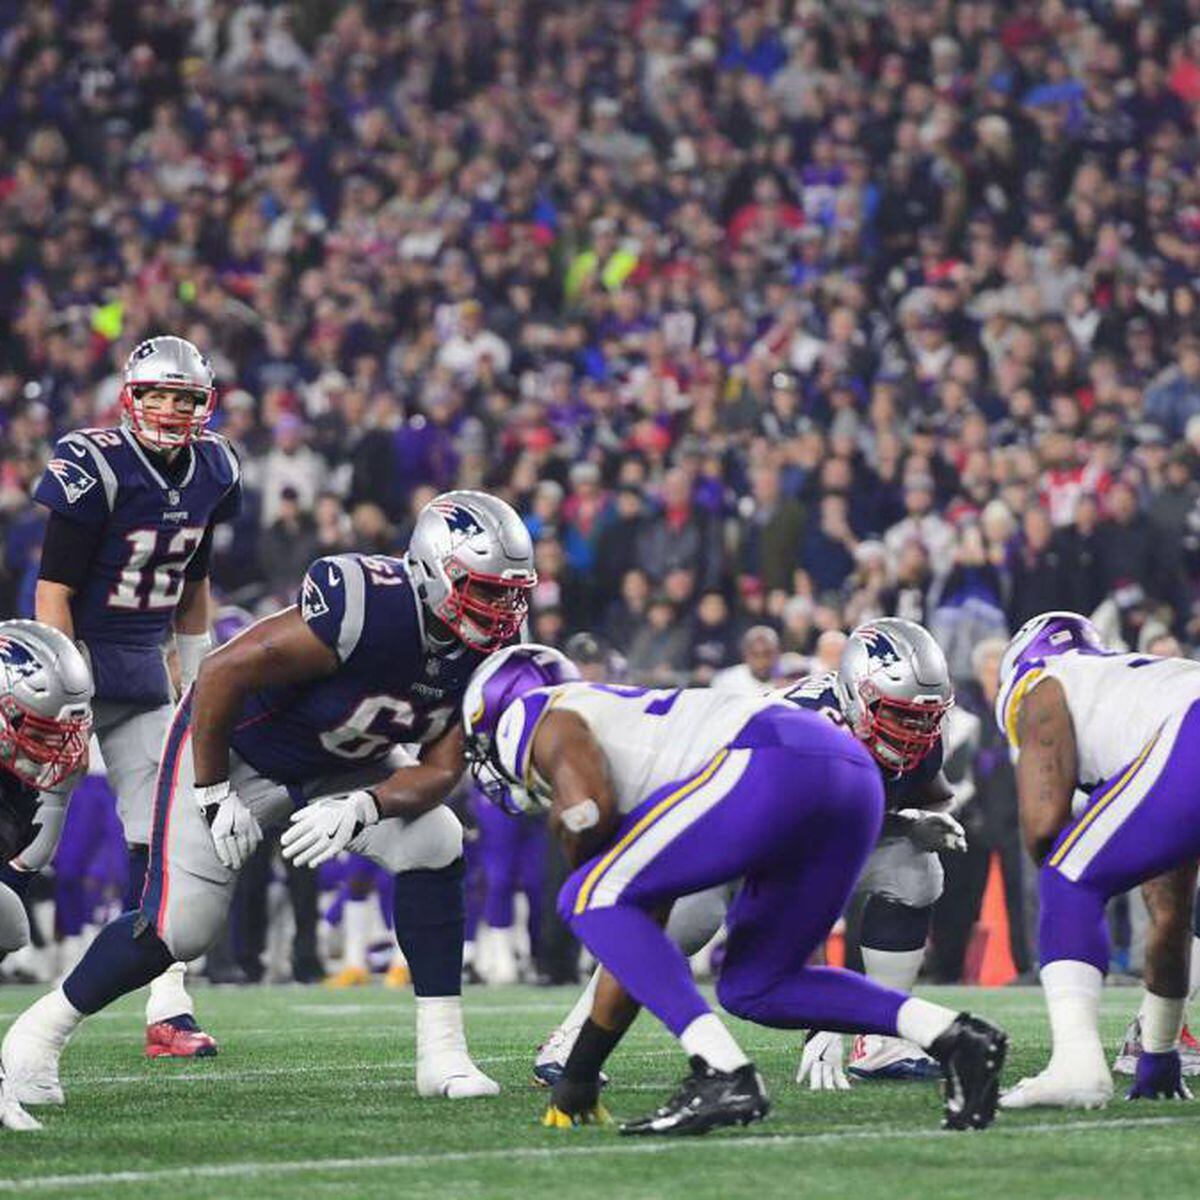 NFL schedule 2022: Patriots at Vikings on Thanksgiving night